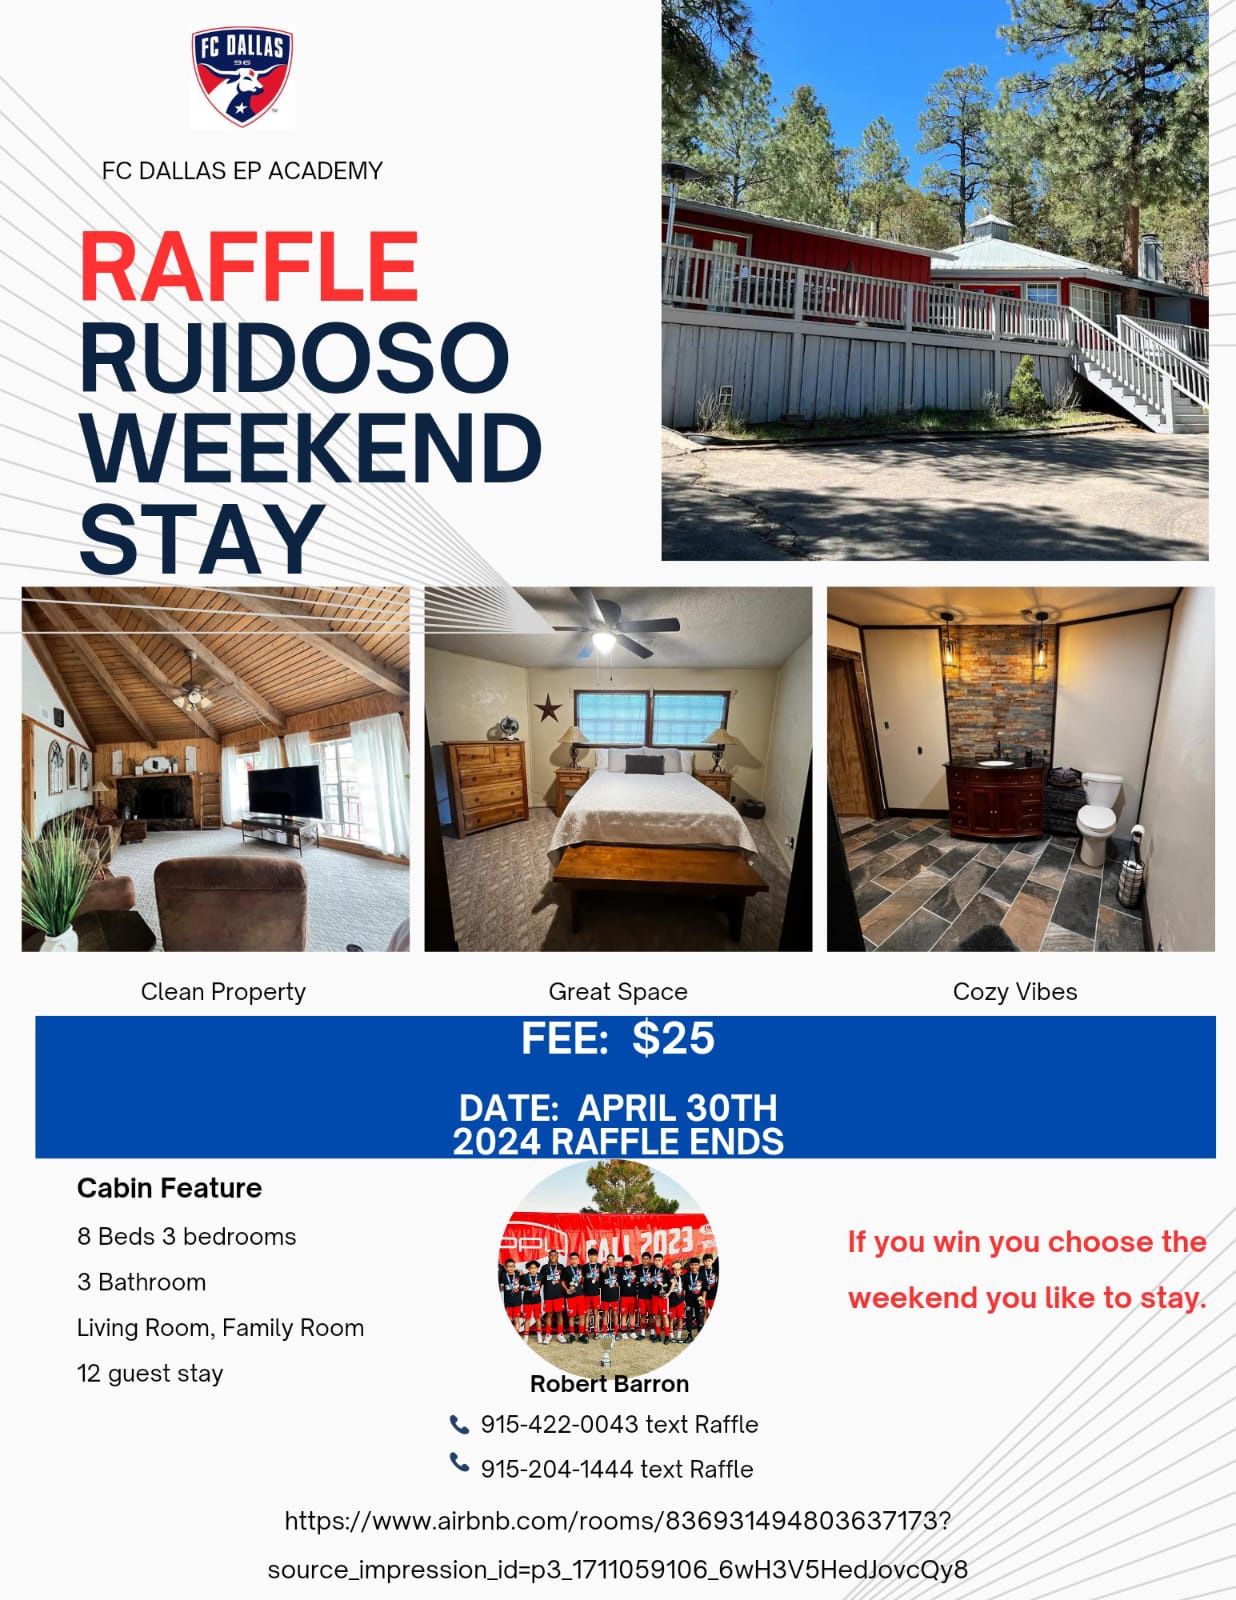 Raffle For Free Stay At Ruidoso For A Weekend If You’re Choosing Cost 25$